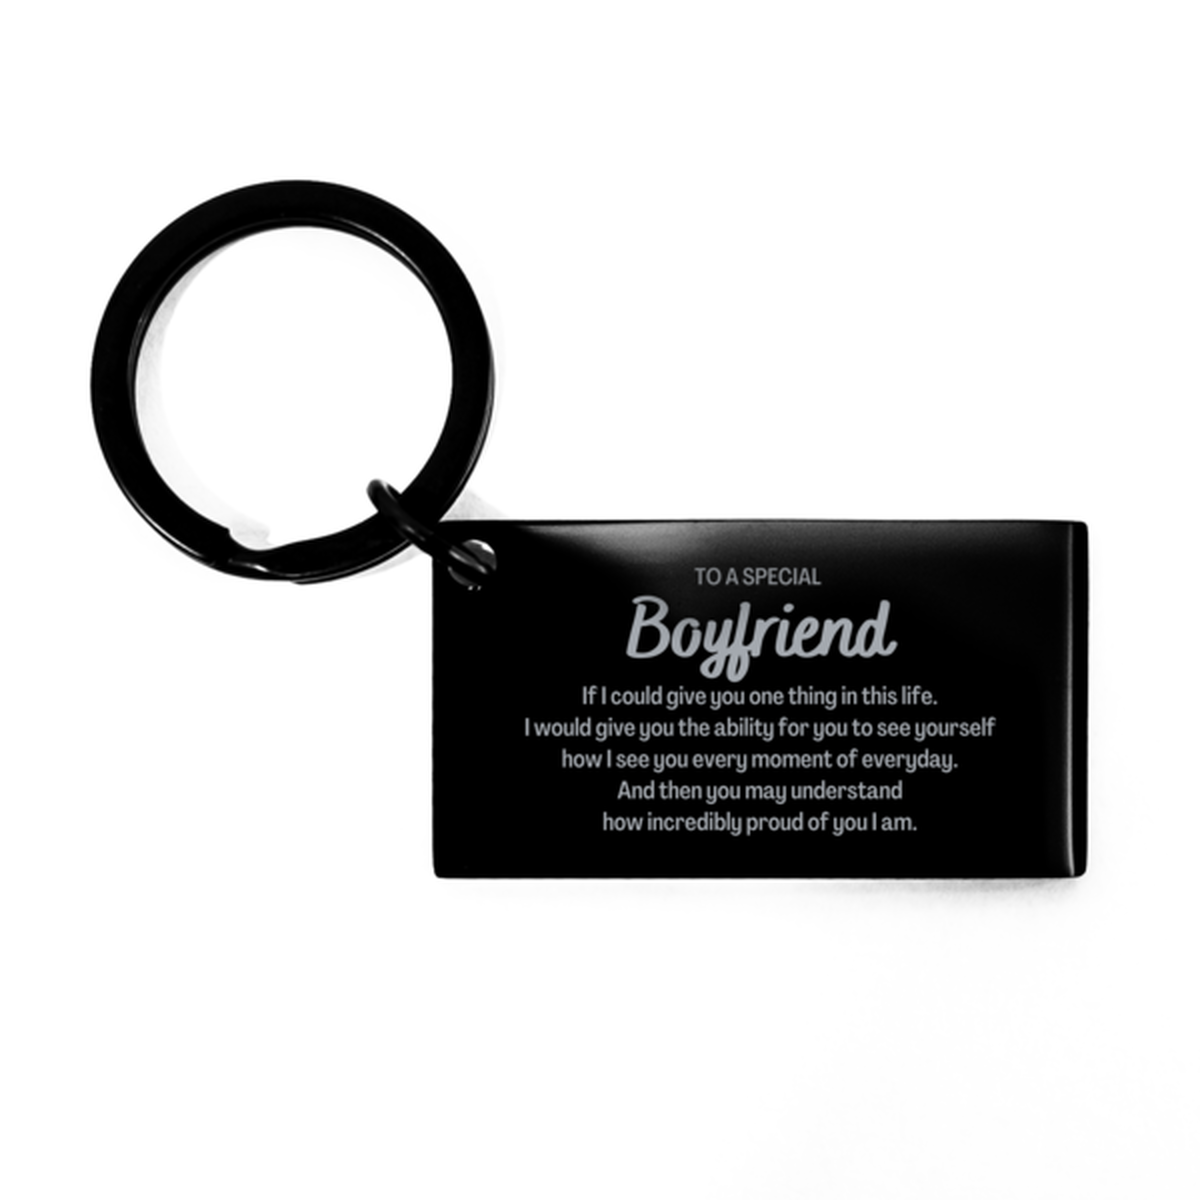 To My Boyfriend Keychain, Gifts For Boyfriend Engraved, Inspirational Gifts for Christmas Birthday, Epic Gifts for Boyfriend To A Special Boyfriend how incredibly proud of you I am